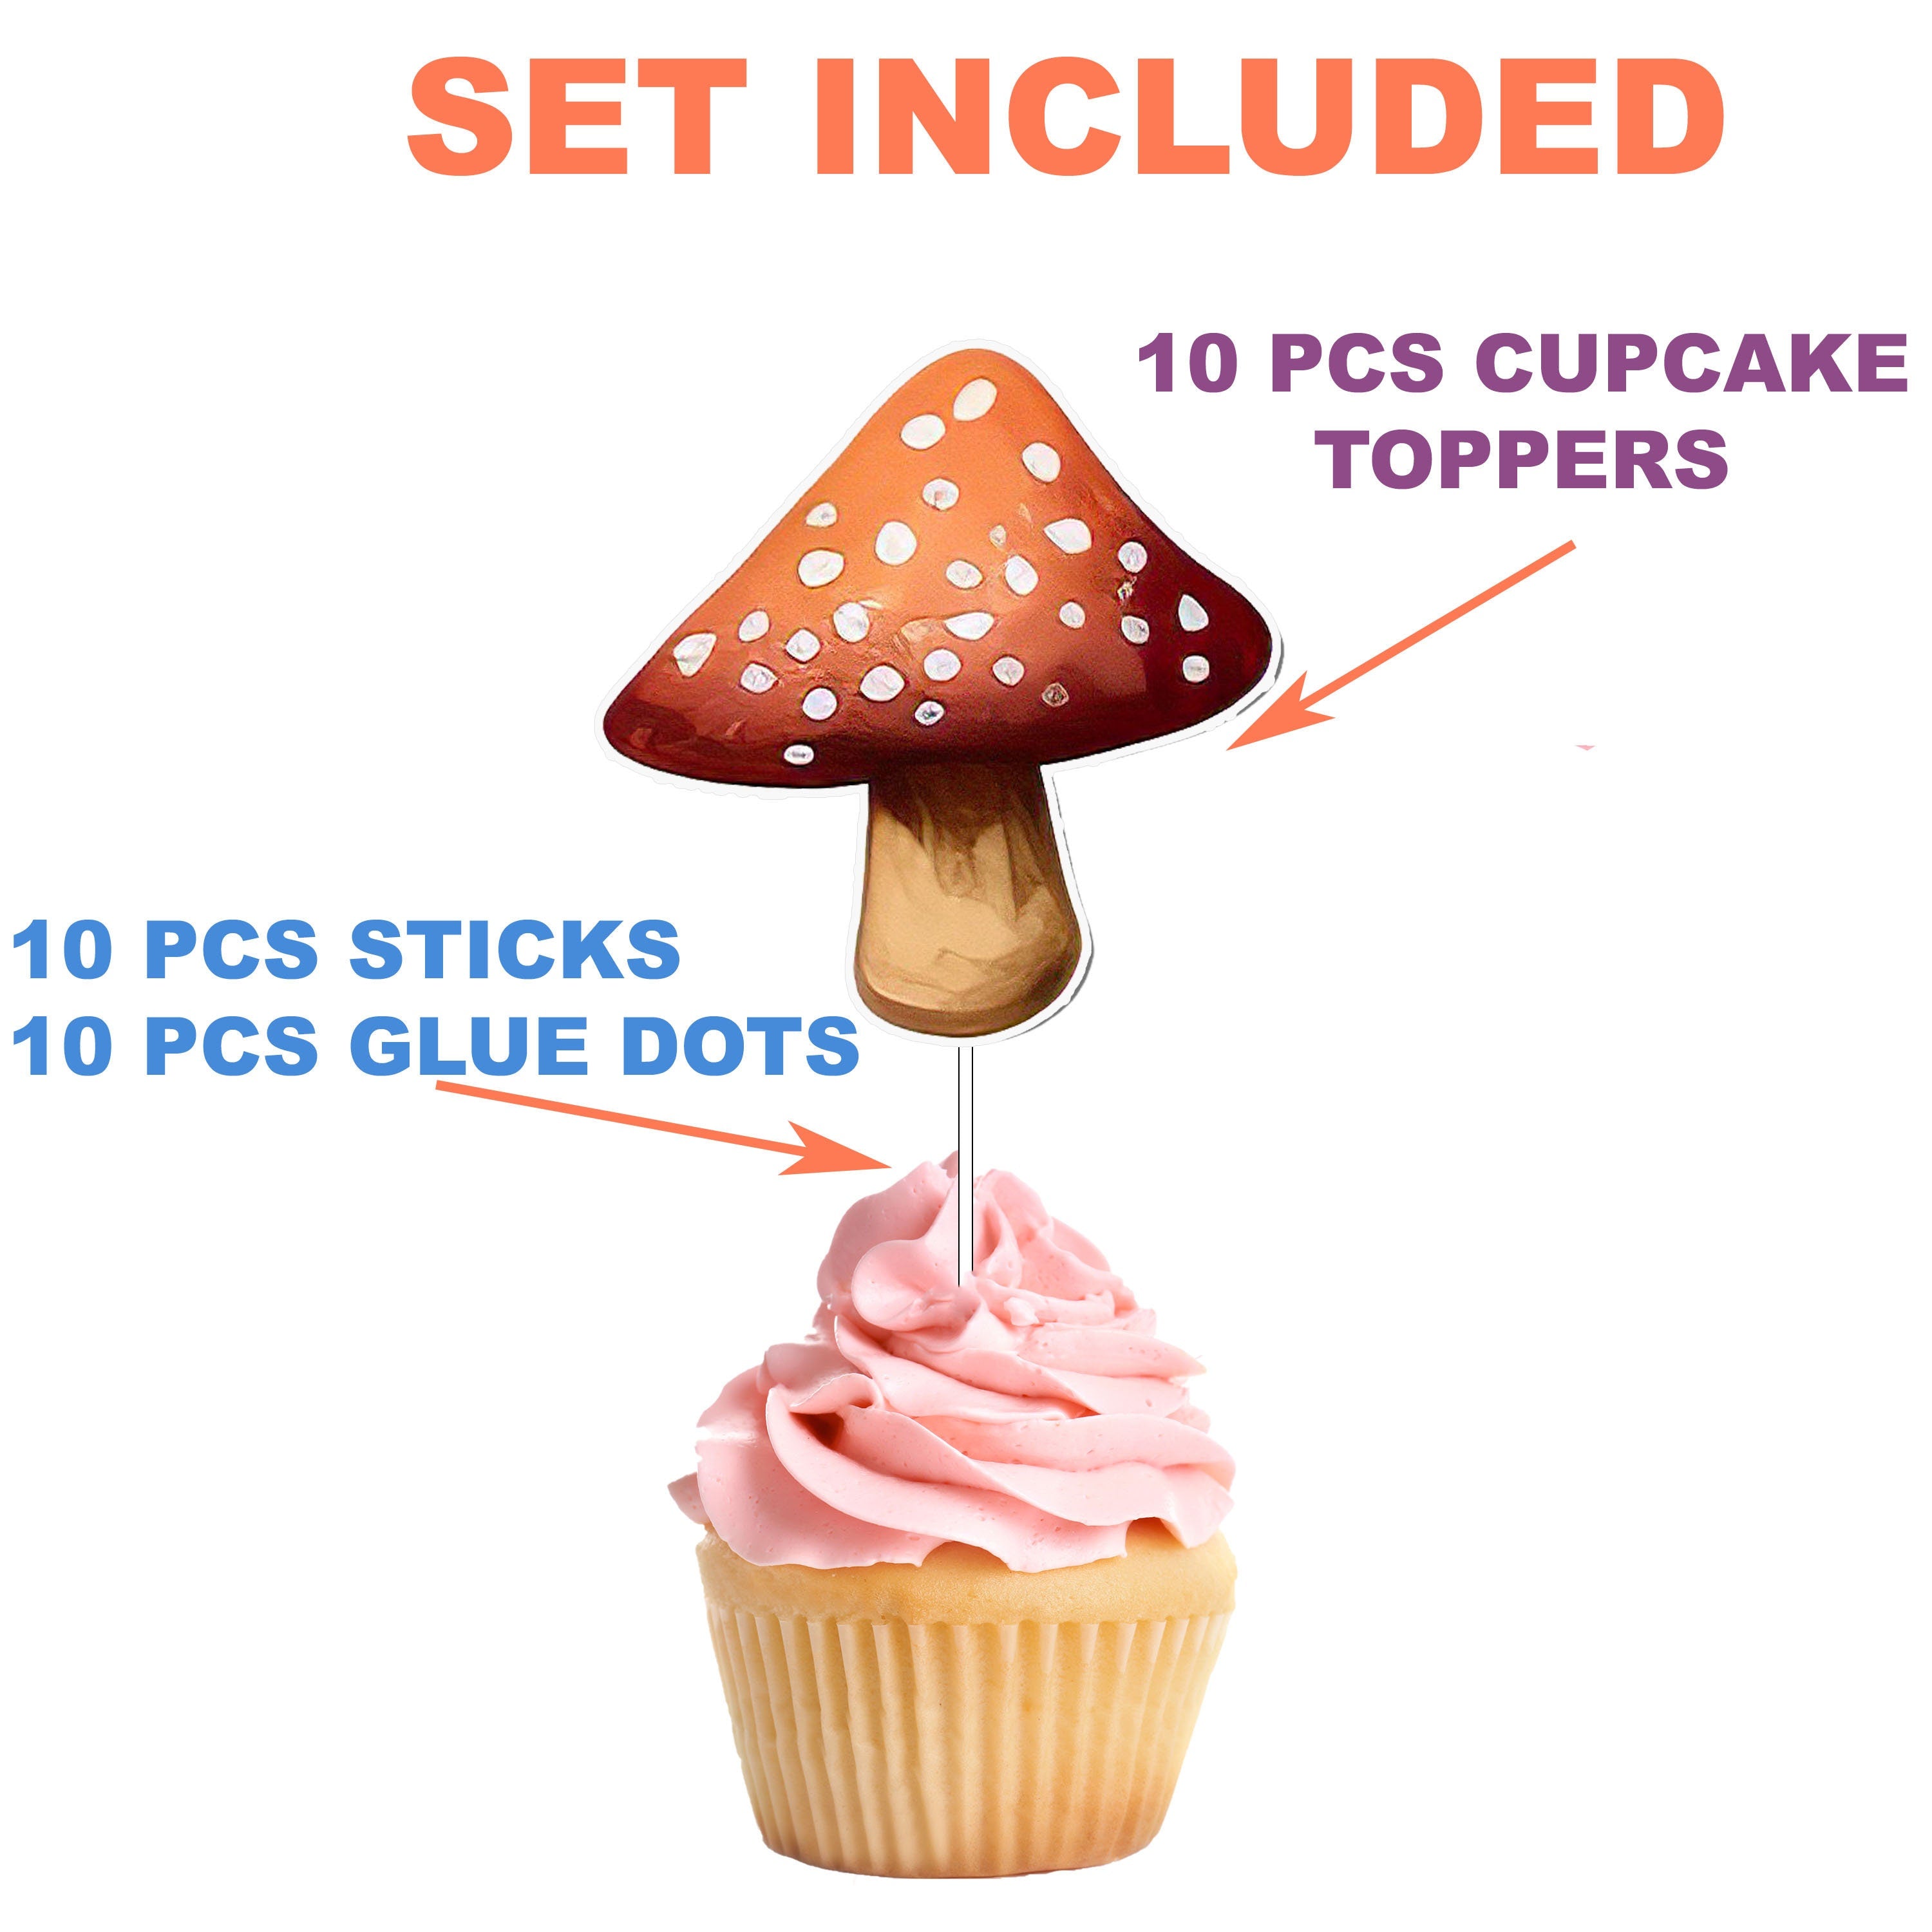 "Enchanted Mycology" - Forest Mushrooms Cupcake Toppers for a Whimsical Party Treat!